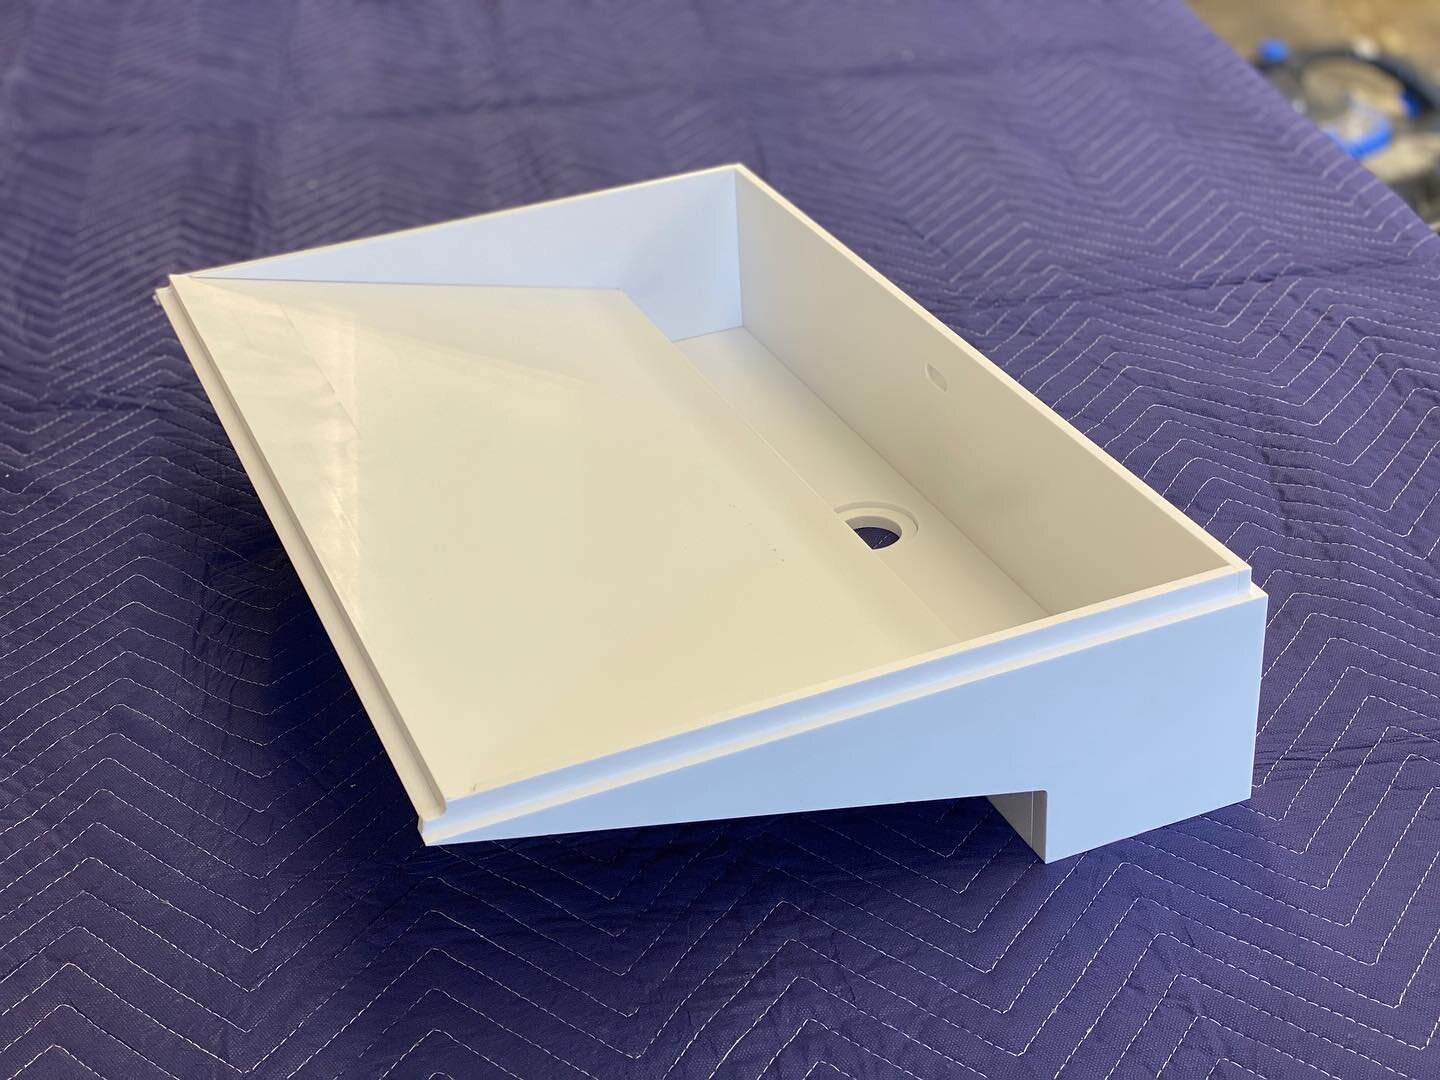 This CNC cut Corian sink features some funky two sided cutting. Once assembled with color matched adhesive, the sink will mount flush to a corian countertop and be completely seamless. Email us if you have some high tolerance router projects ! 👽